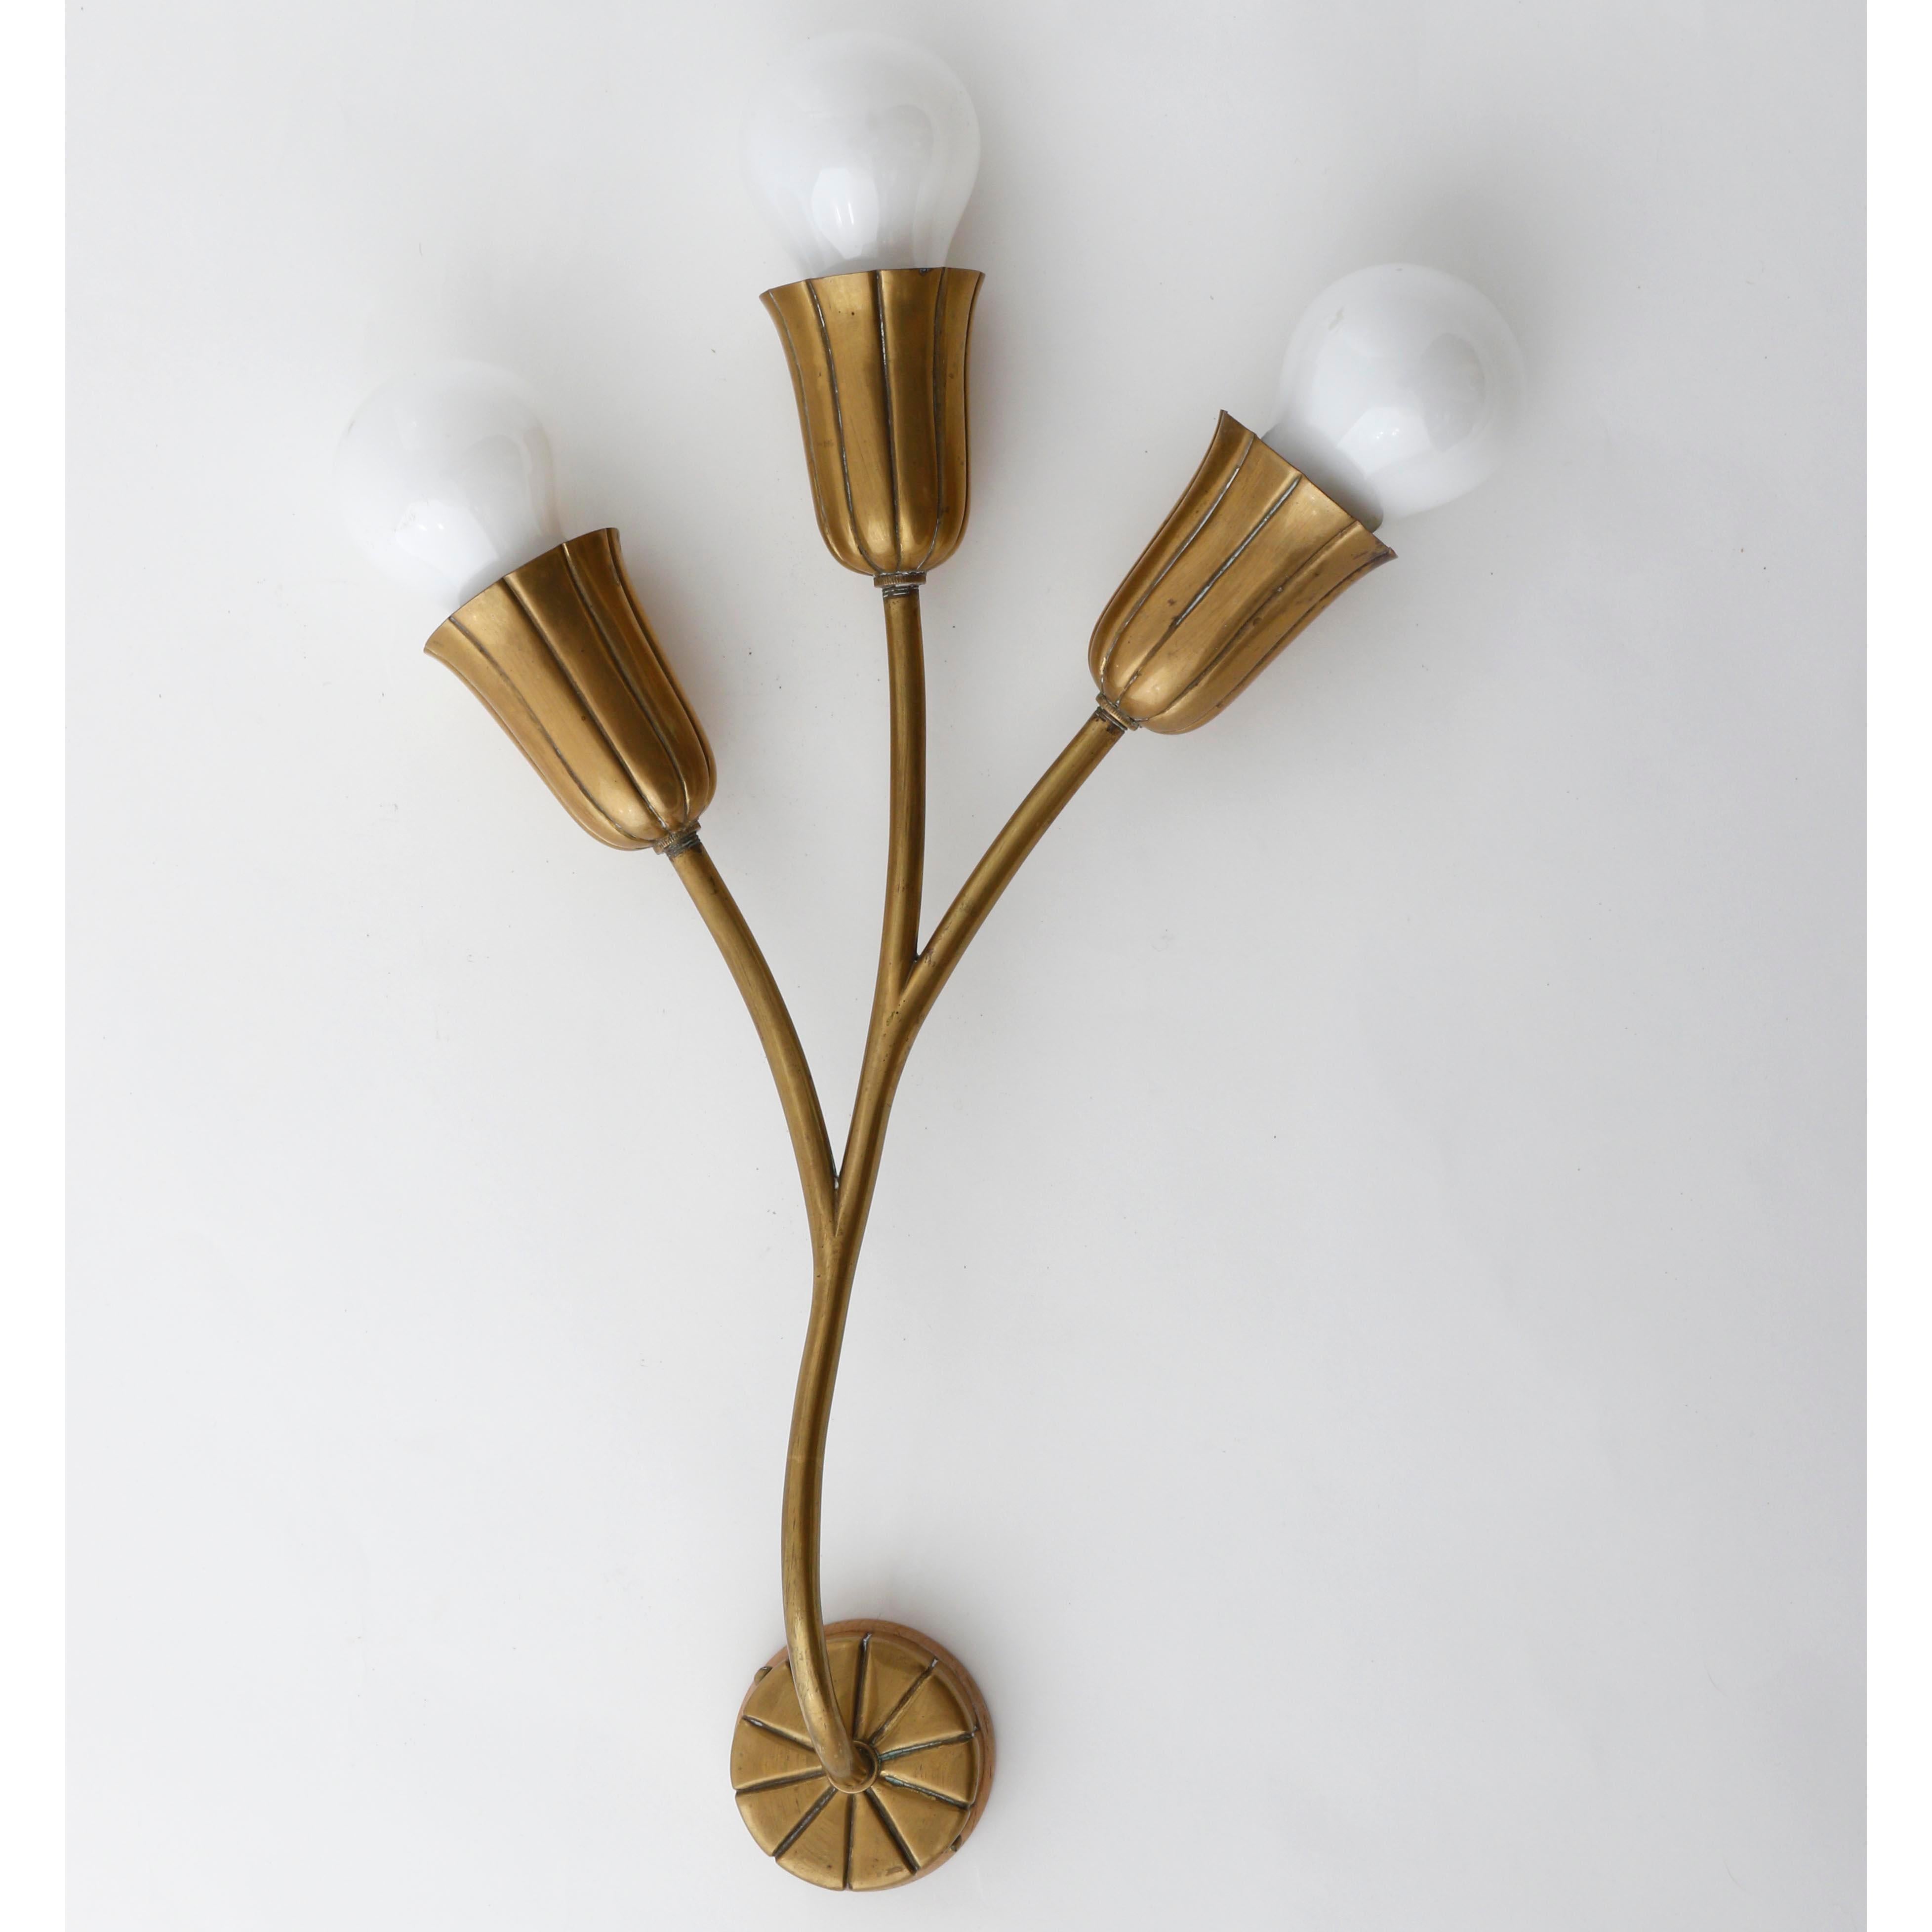 A pair of nice brass wall lamps probably manufactured in Italy in Mid-Century, circa 1960.
Each sconce has three sockets for small screw base candelabra E14 bulbs or LEDs.
They are in good condition with little and lovely patina.

Dimensions